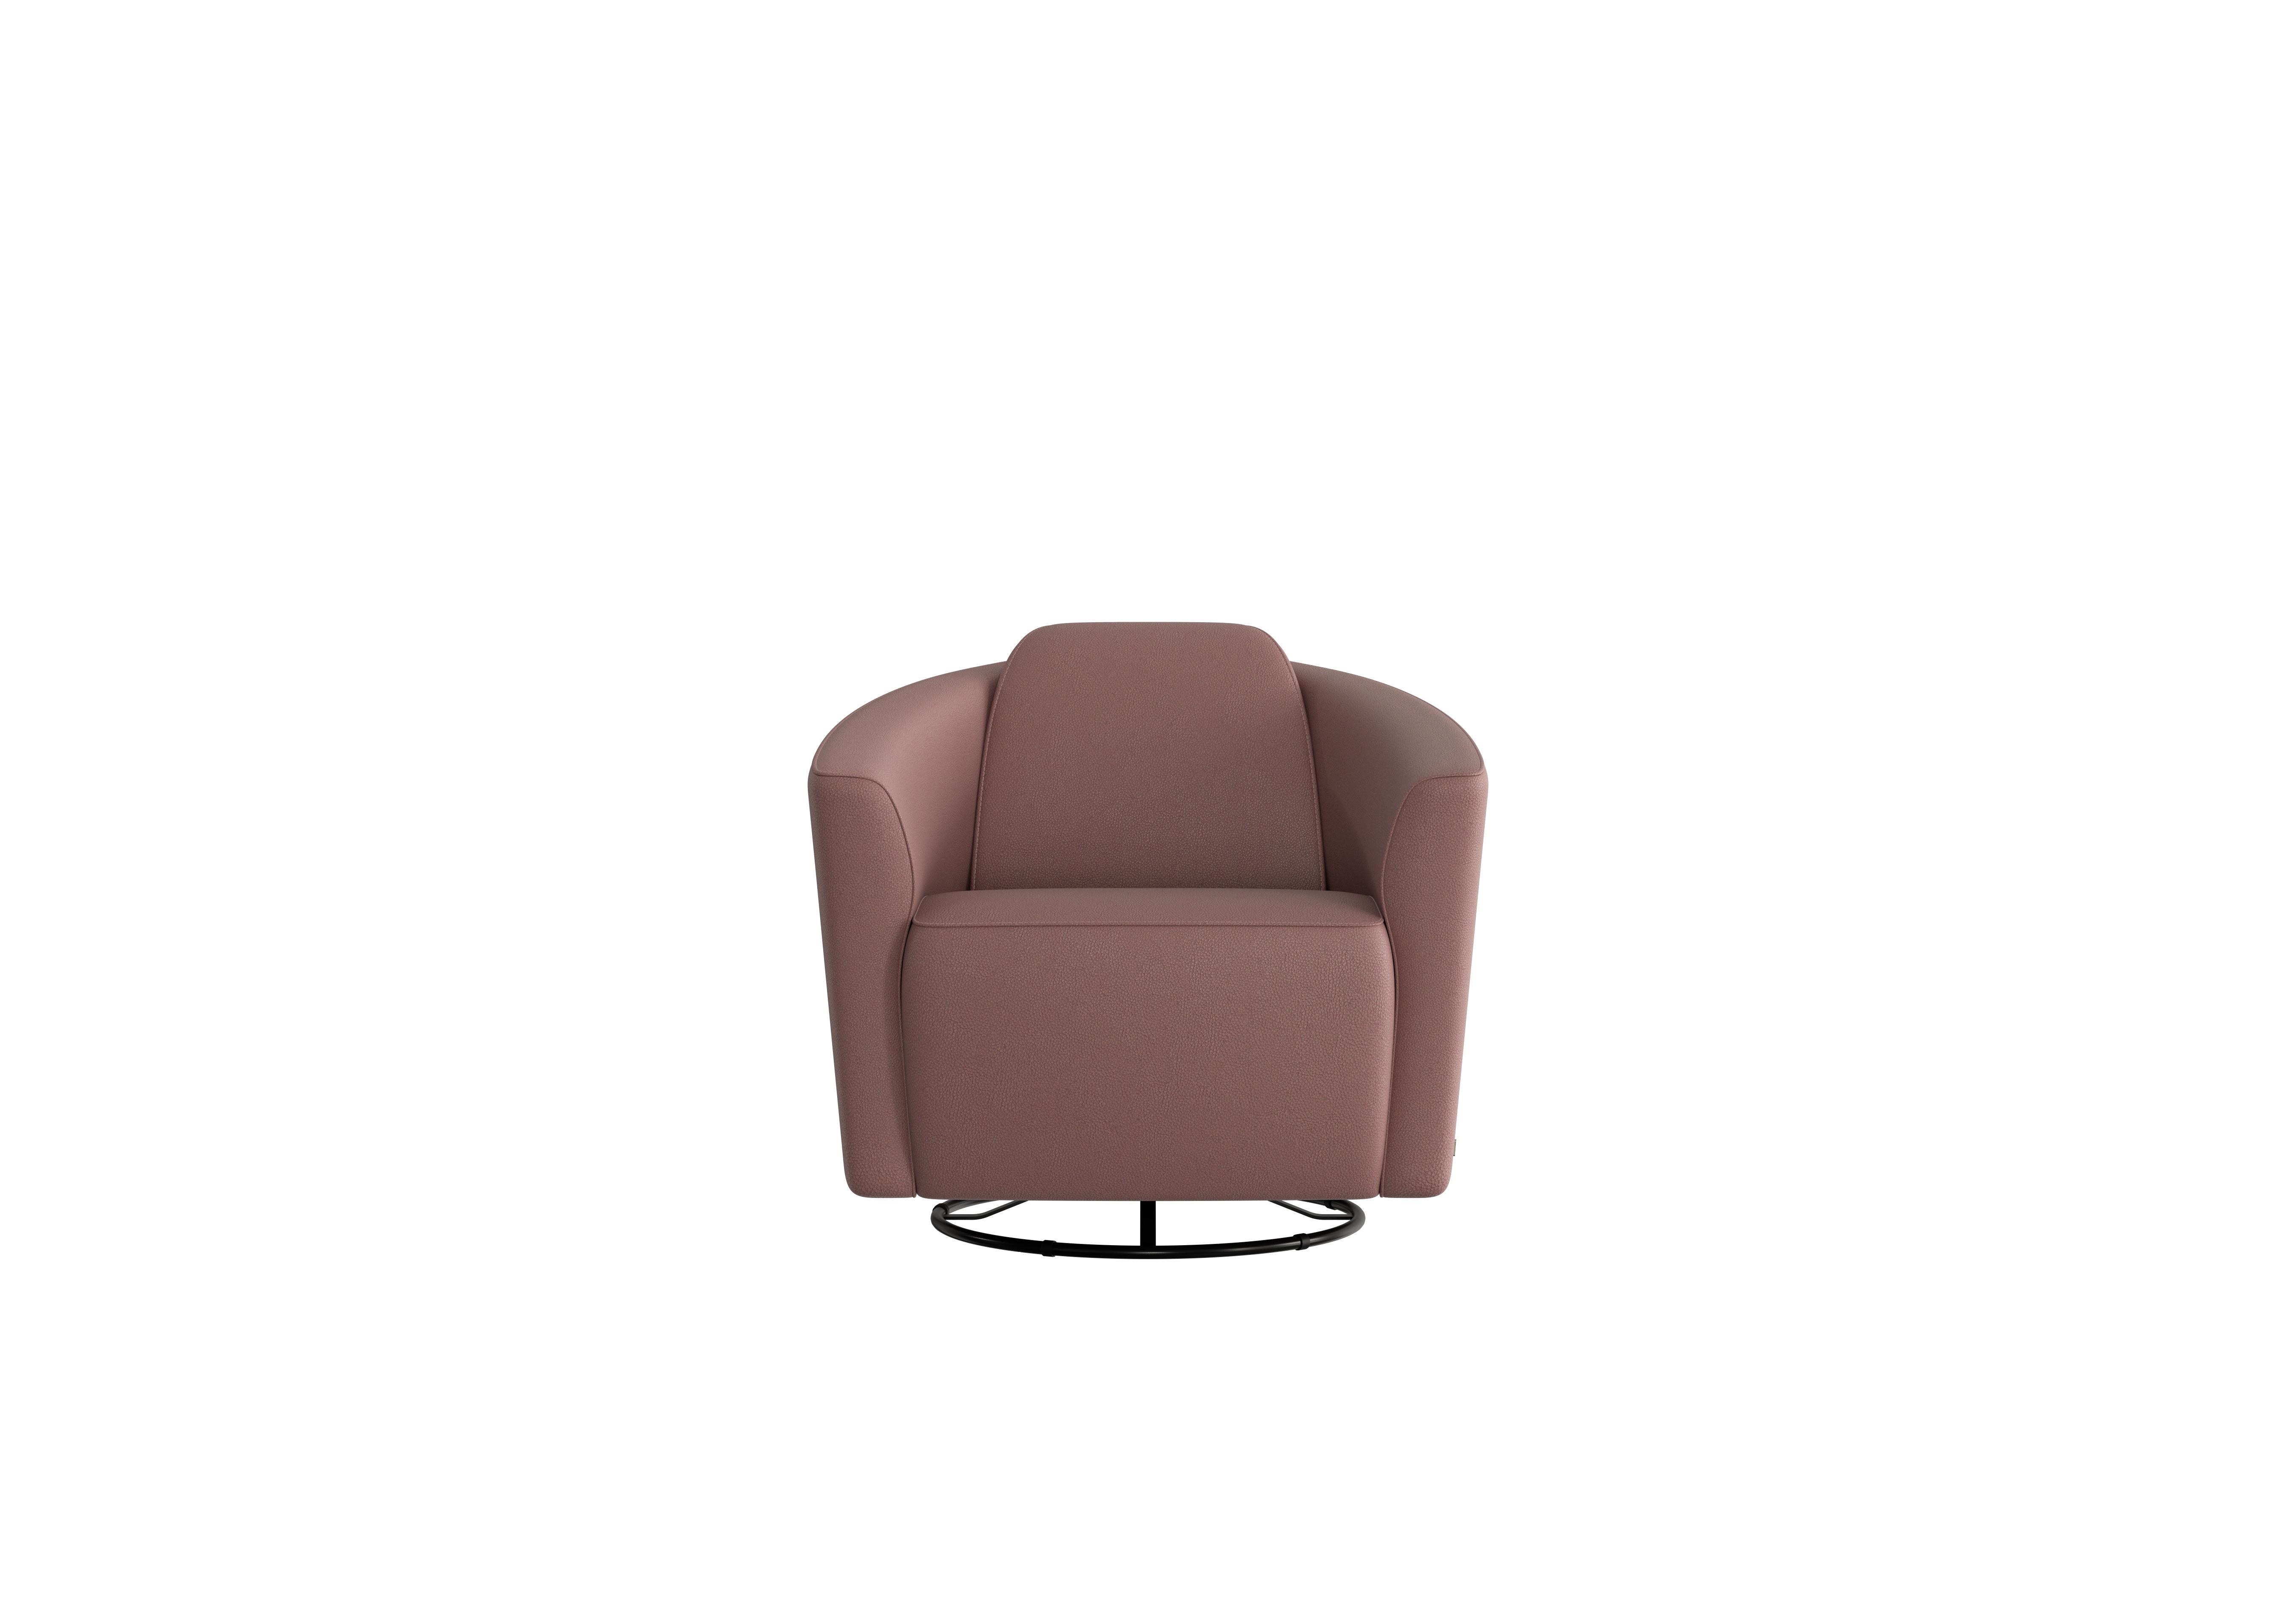 Ketty Leather Swivel Chair in Botero Cipria 2160 on Furniture Village